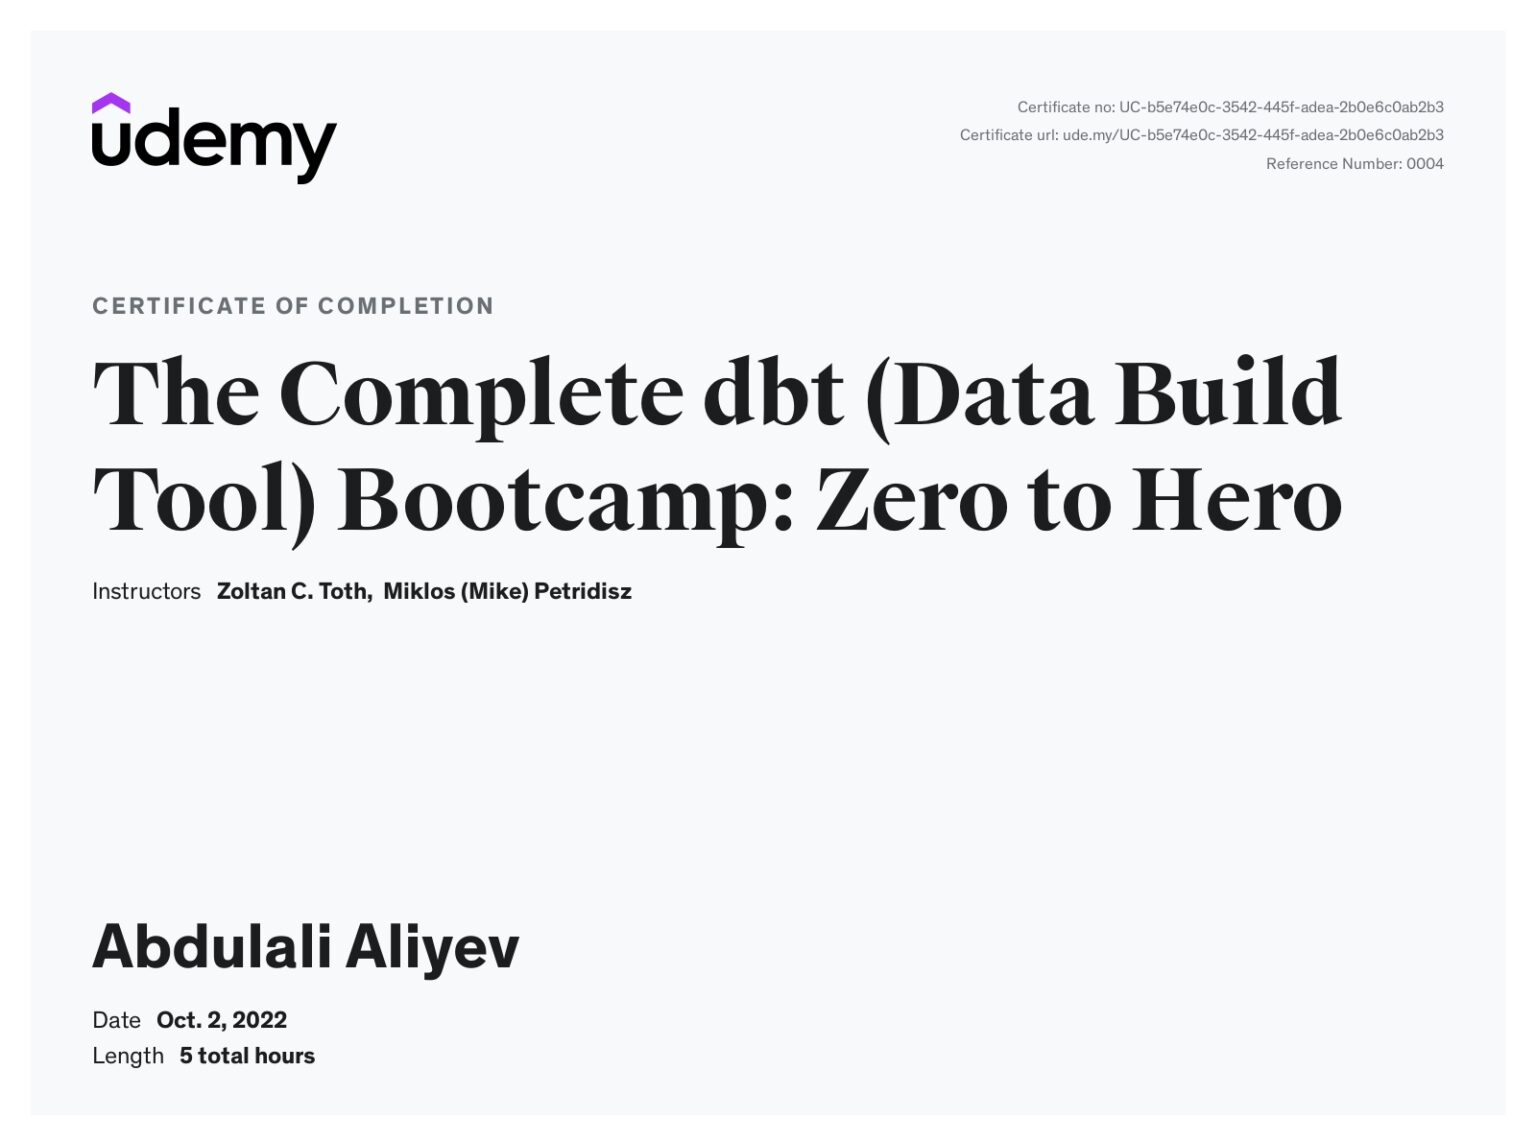 The Complete DBT(Data Build Tool) Bootcamp